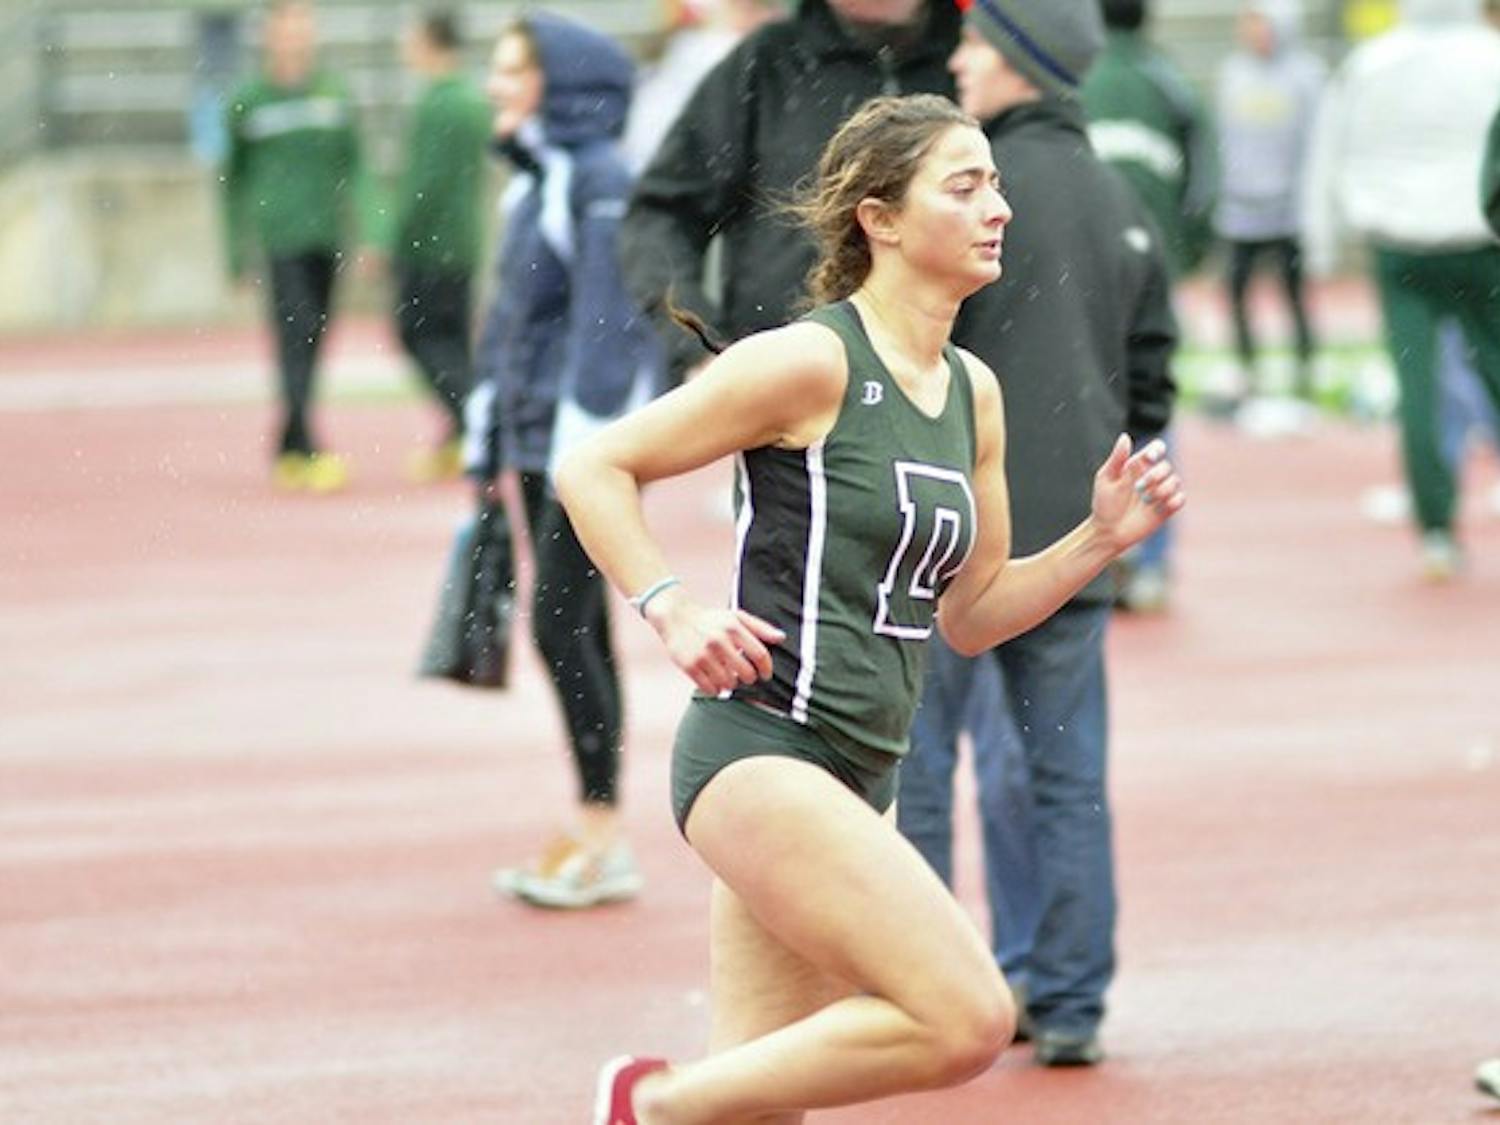 Alexi Pappas '12 excels both on and off the track, earning high grades and dominating in competition.